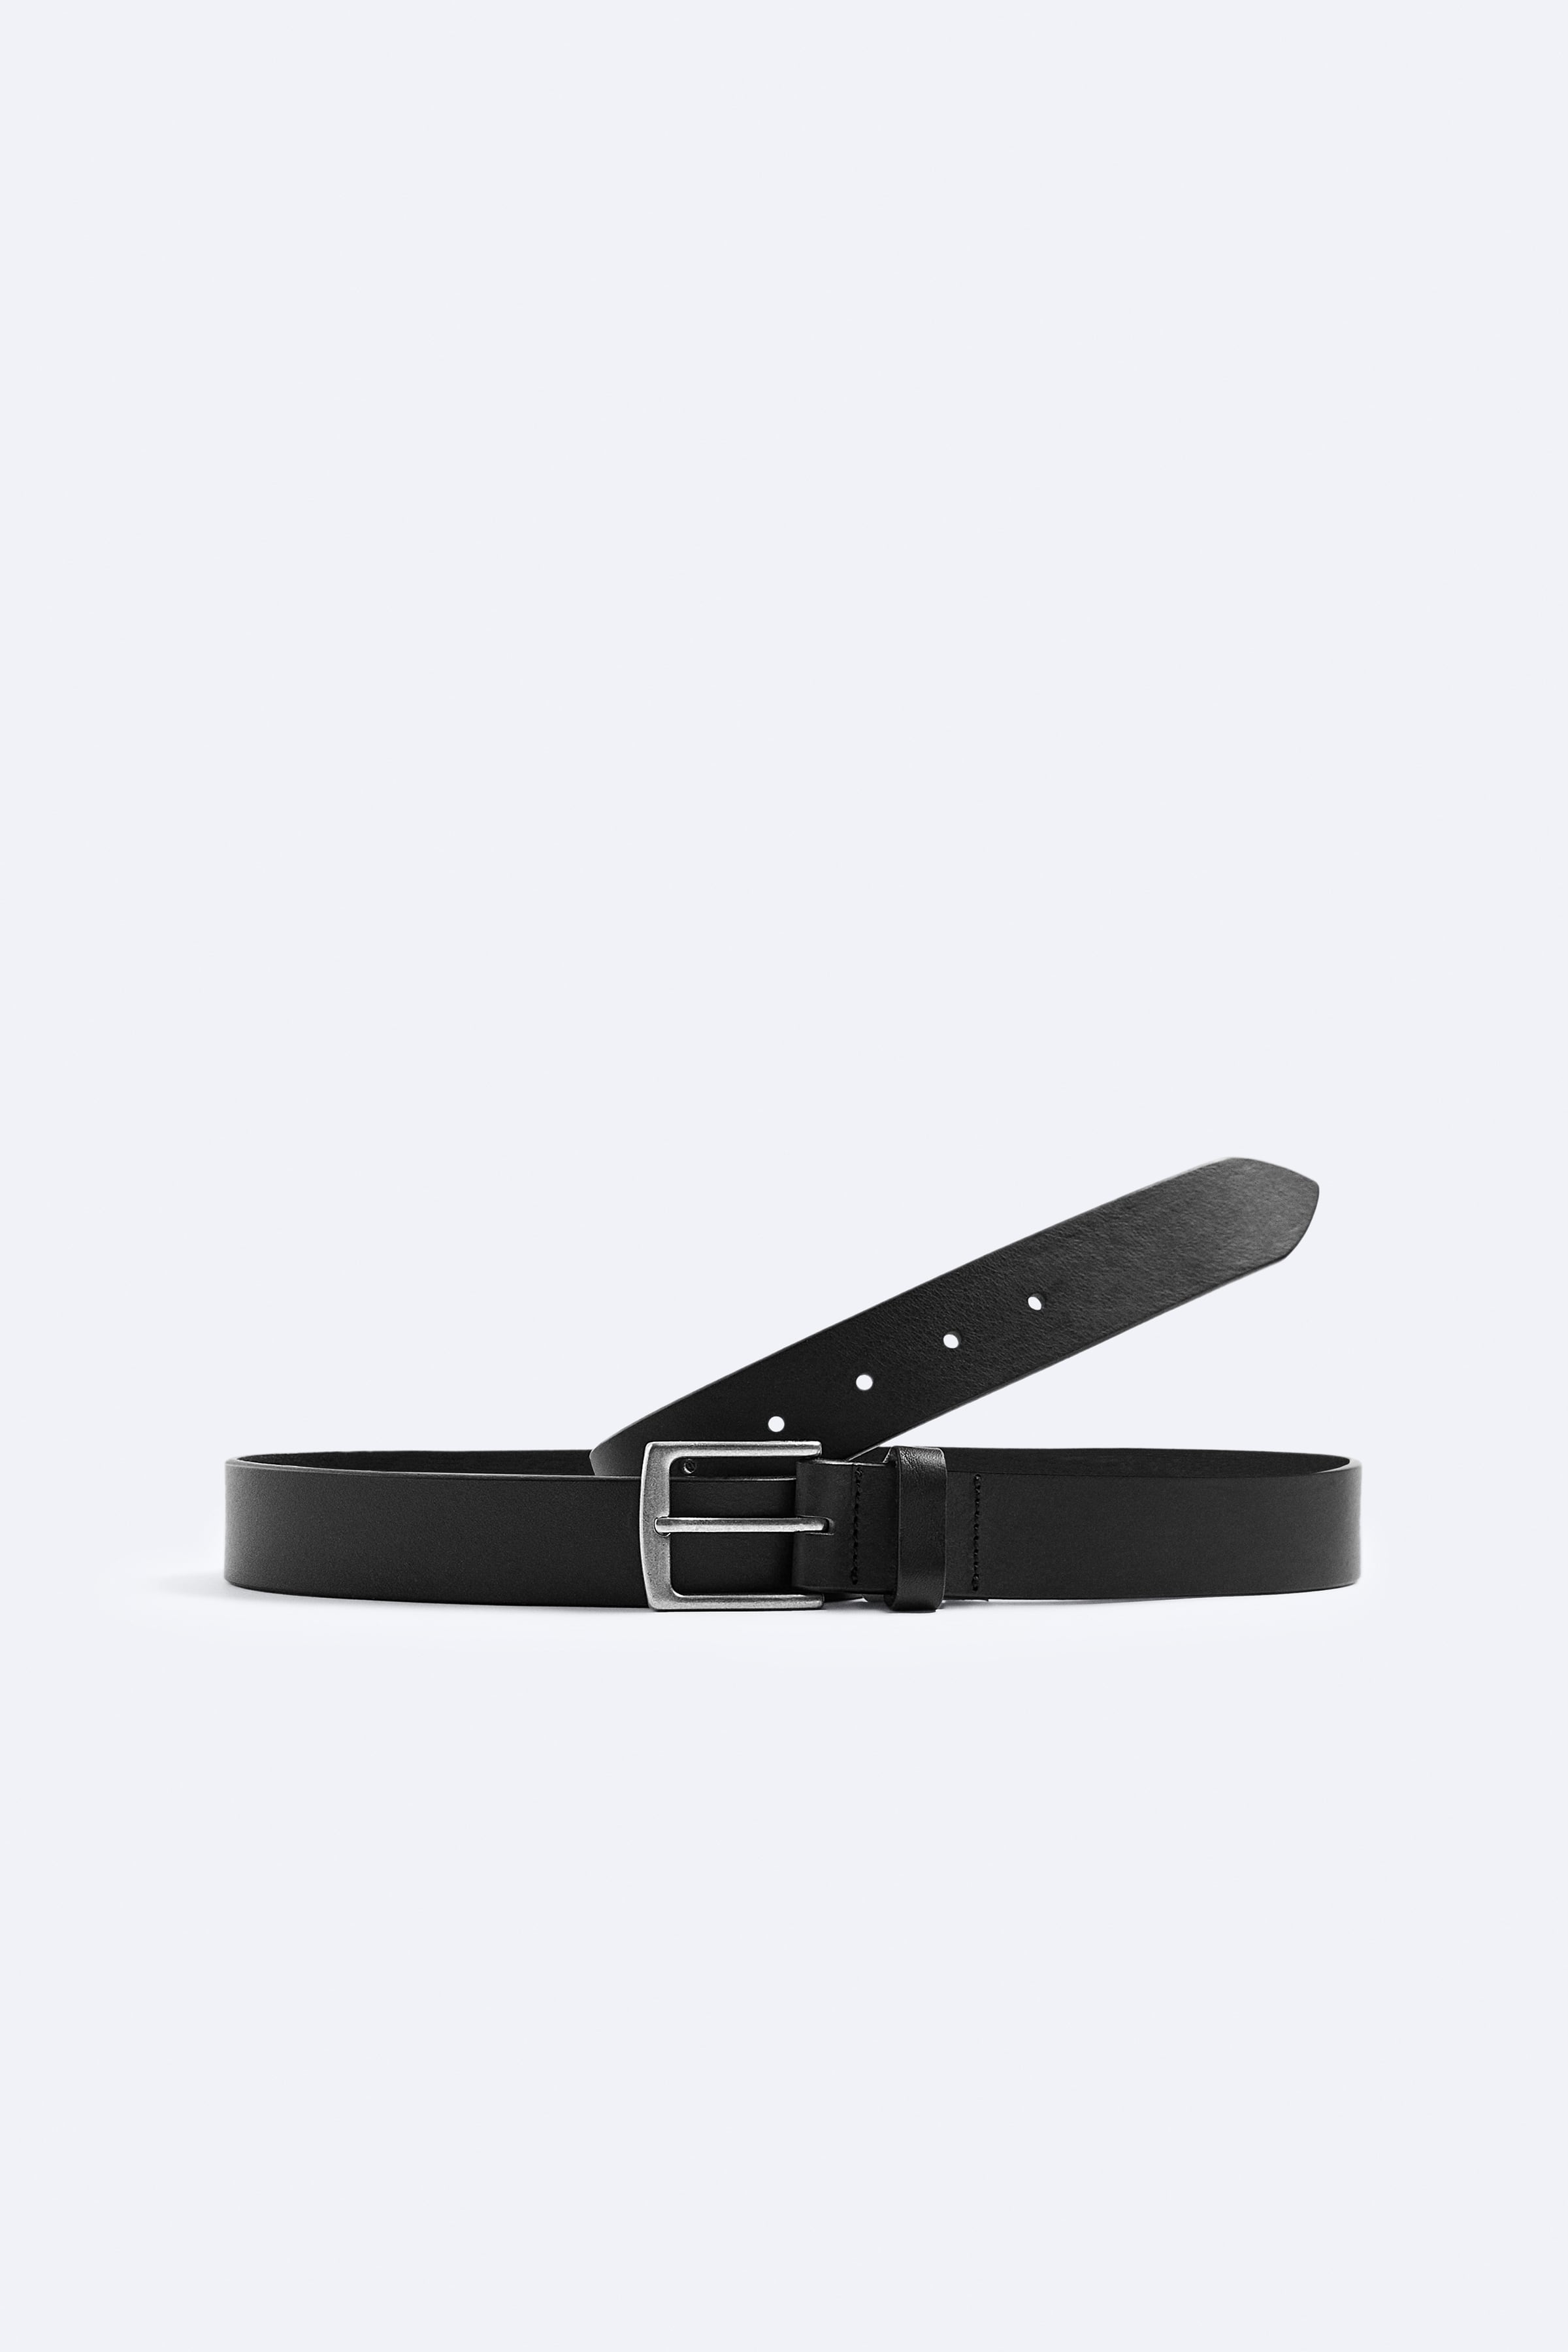 Leather belt. Metal buckle and loop closure.<br/><br/>1.3 inches (3.2 cm)<br/><br/>Origins special collection.